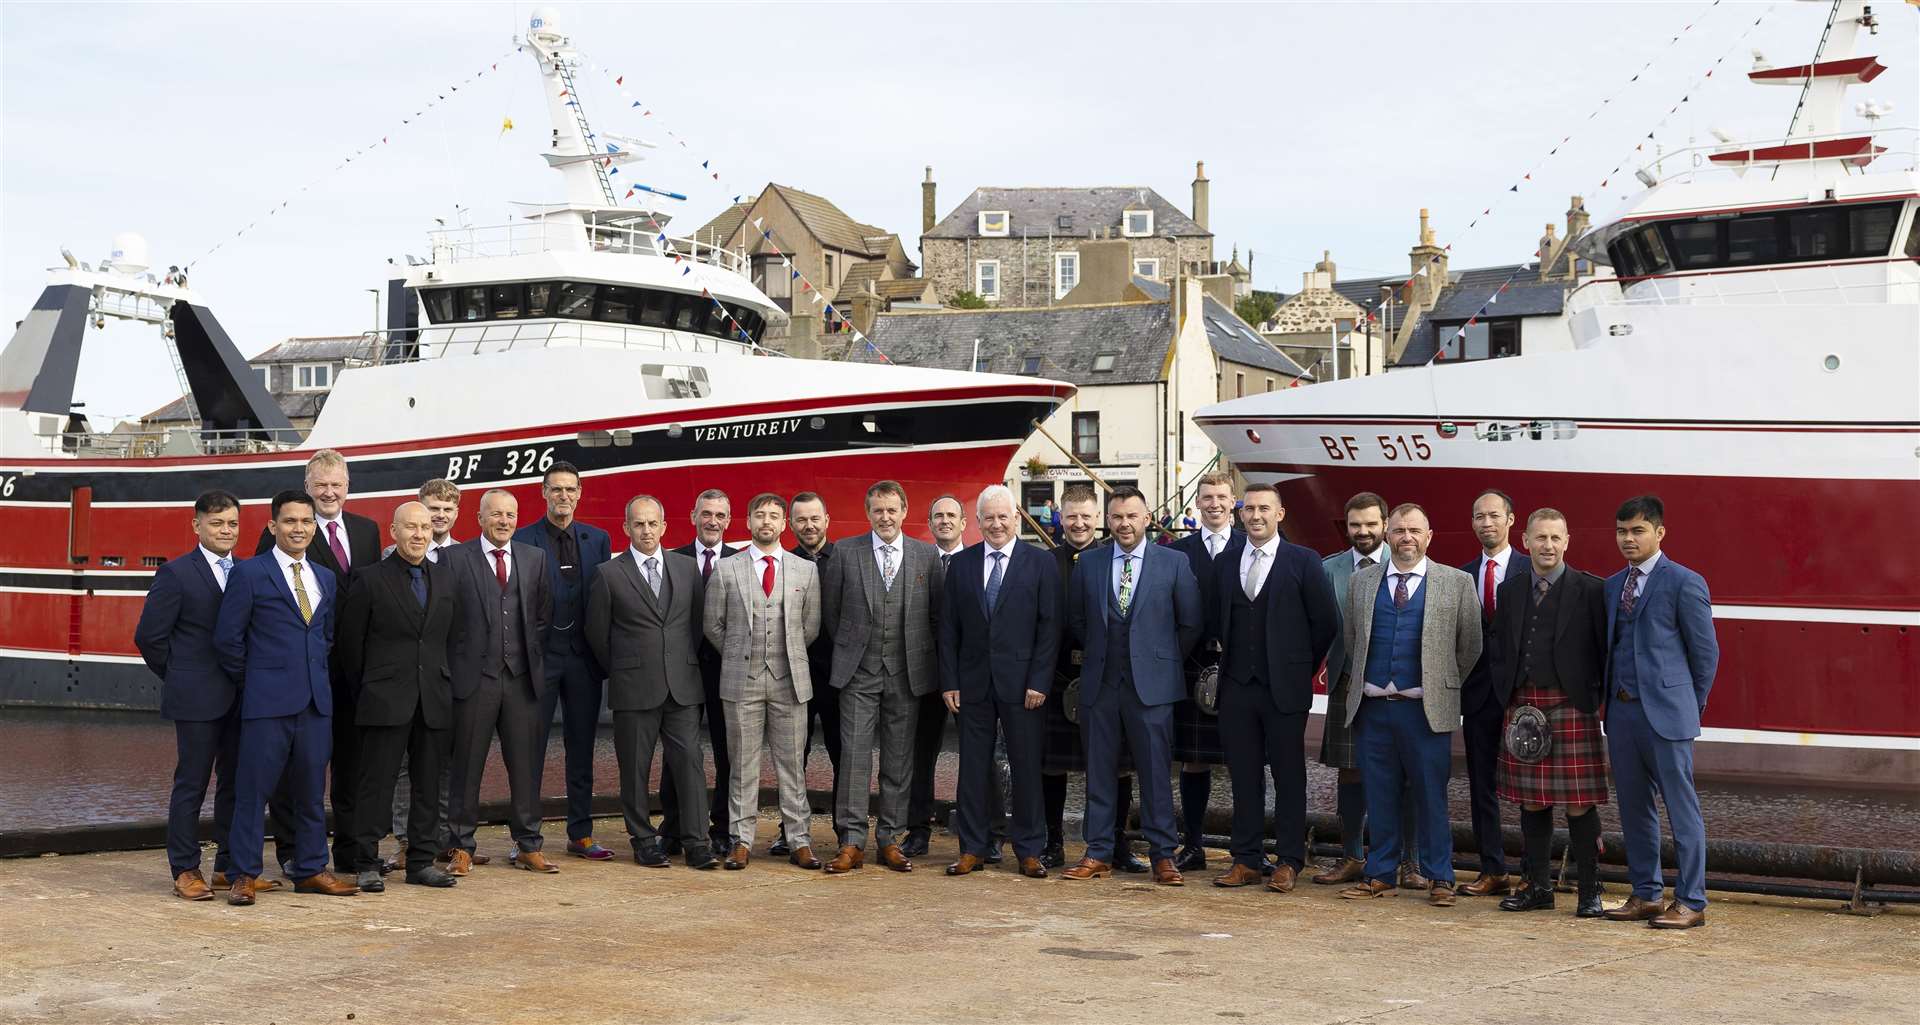 Naming ceremony for new fishing vessels held at Macduff